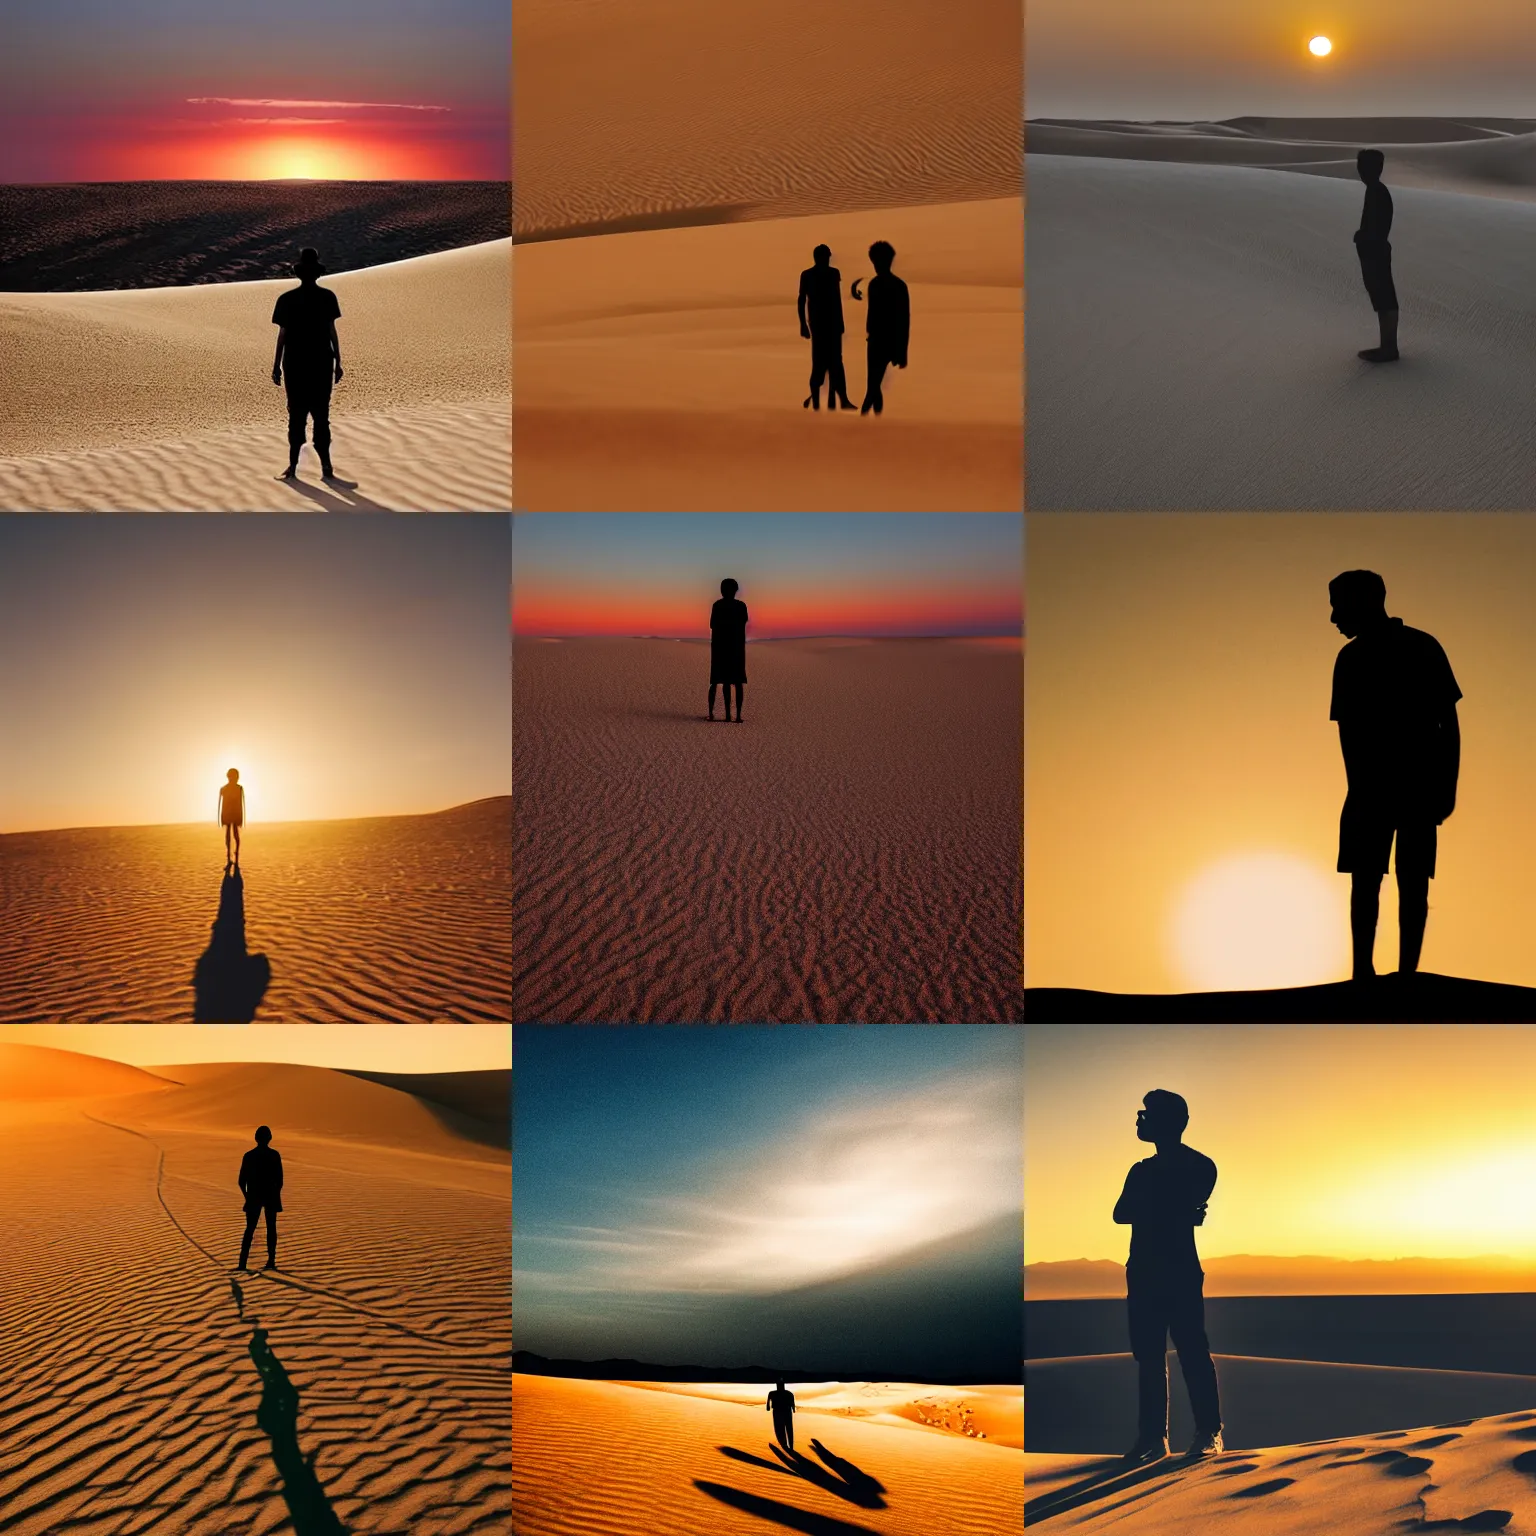 Prompt: a silhouette of a single person standing alone in the desert with the sunset and sand dunes behind them